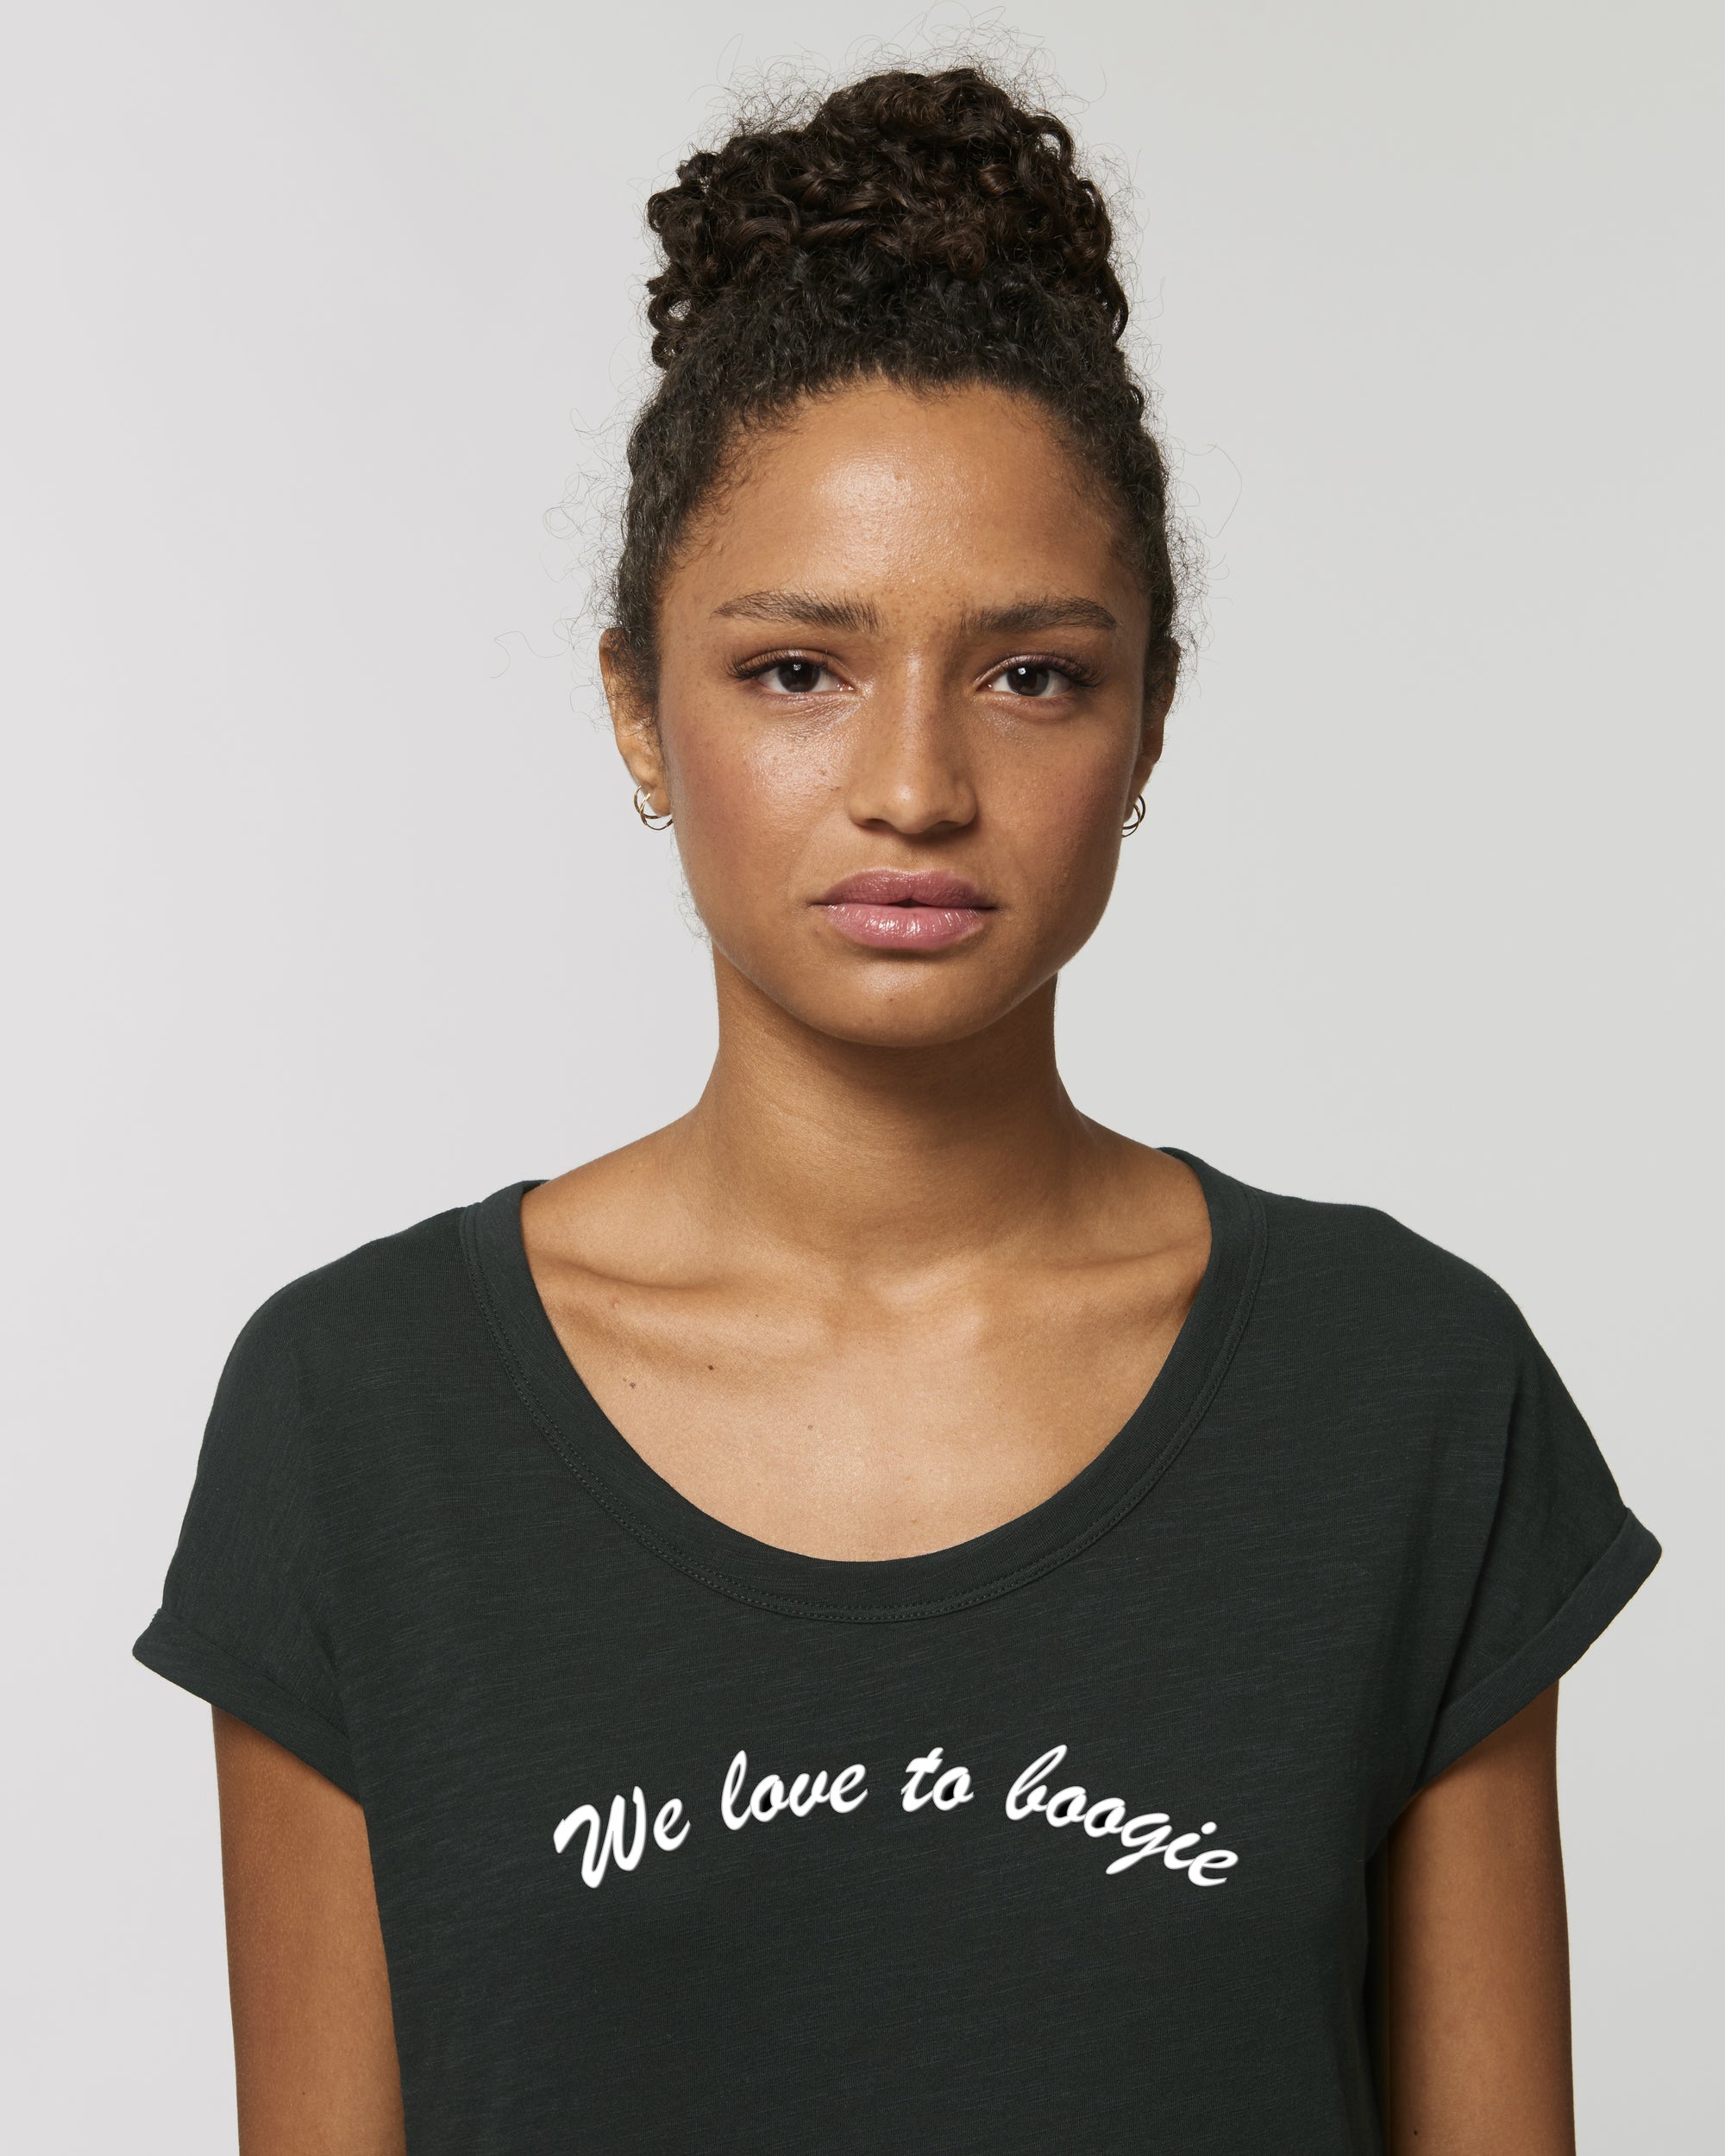 'WE LOVE TO BOOGIE' EMBROIDERED WOMEN'S ROLLED SLEEVE ORGANIC COTTON SLUB T-SHIRT